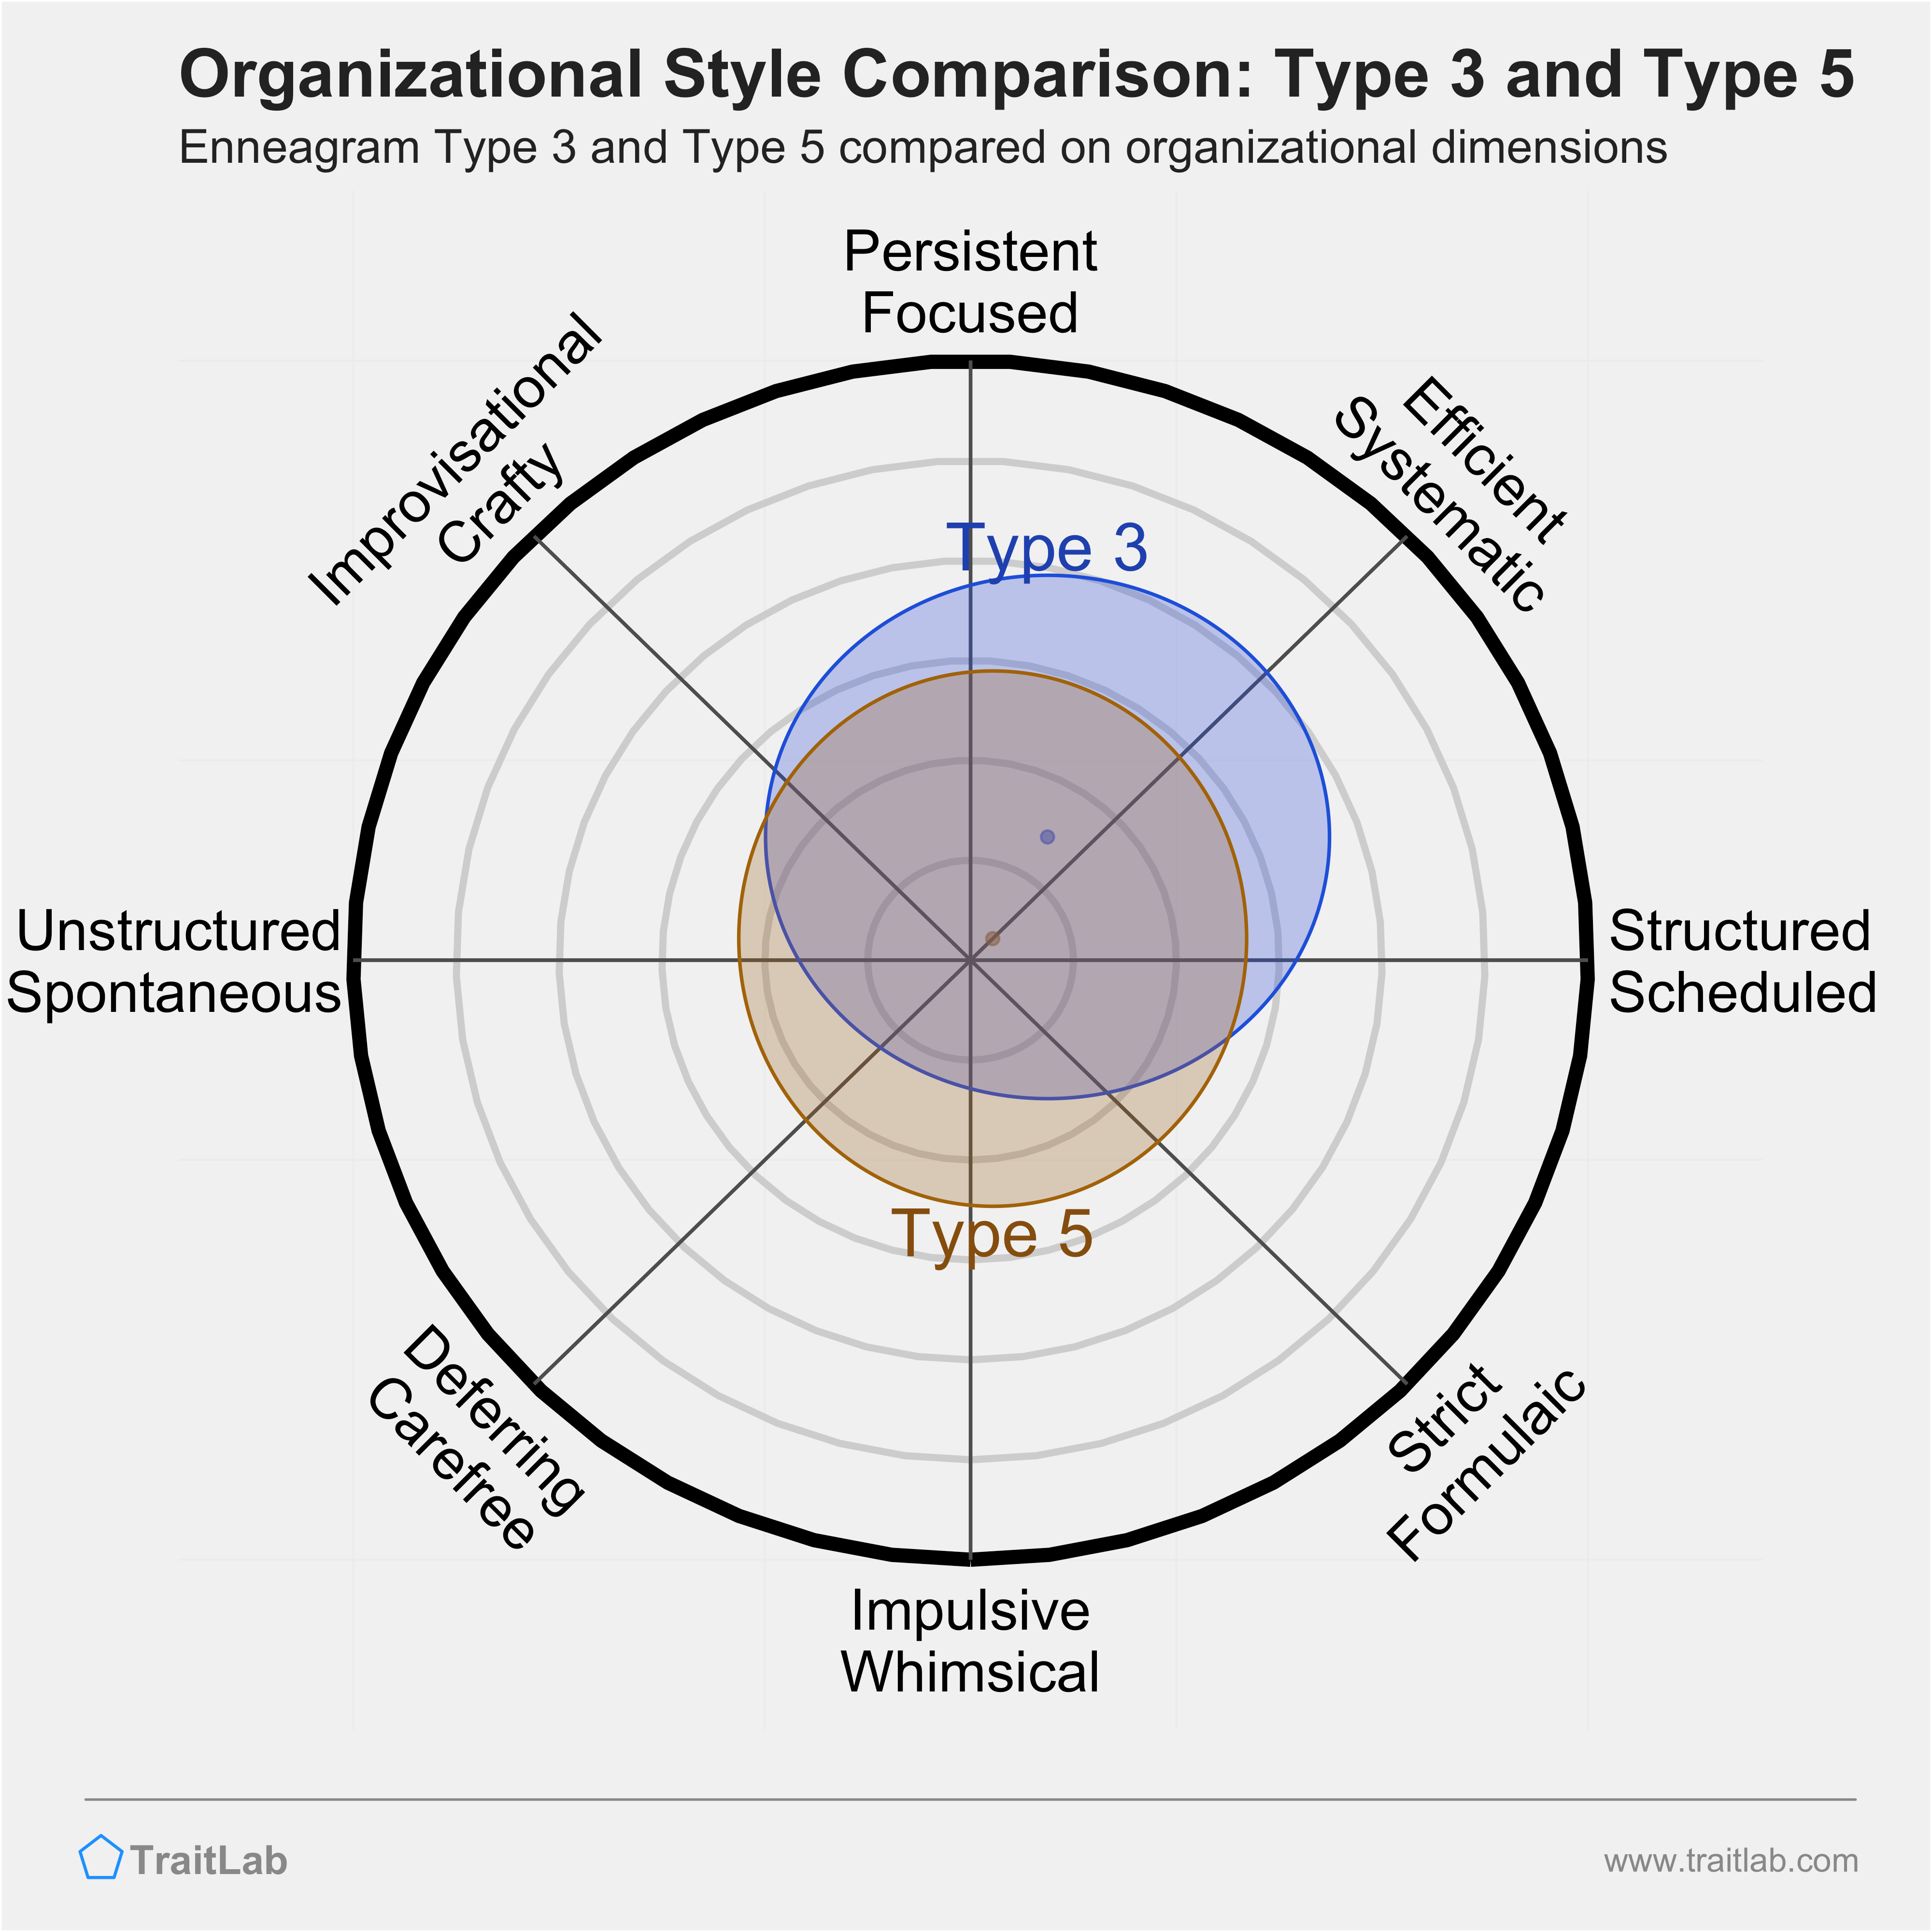 Type 3 and Type 5 comparison across organizational dimensions